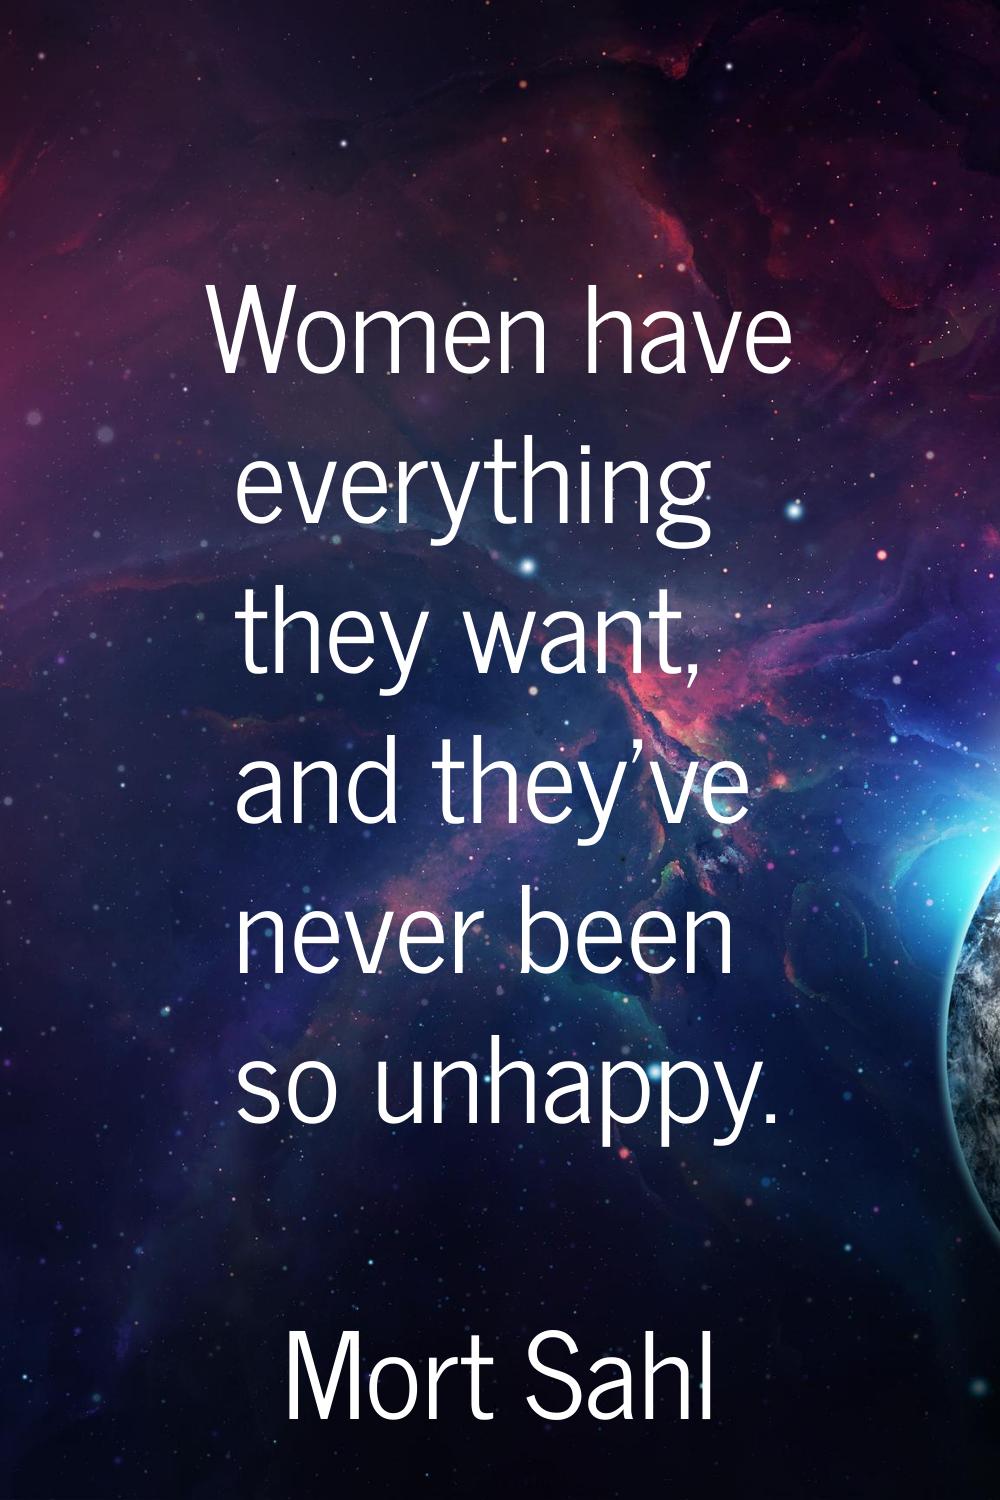 Women have everything they want, and they've never been so unhappy.